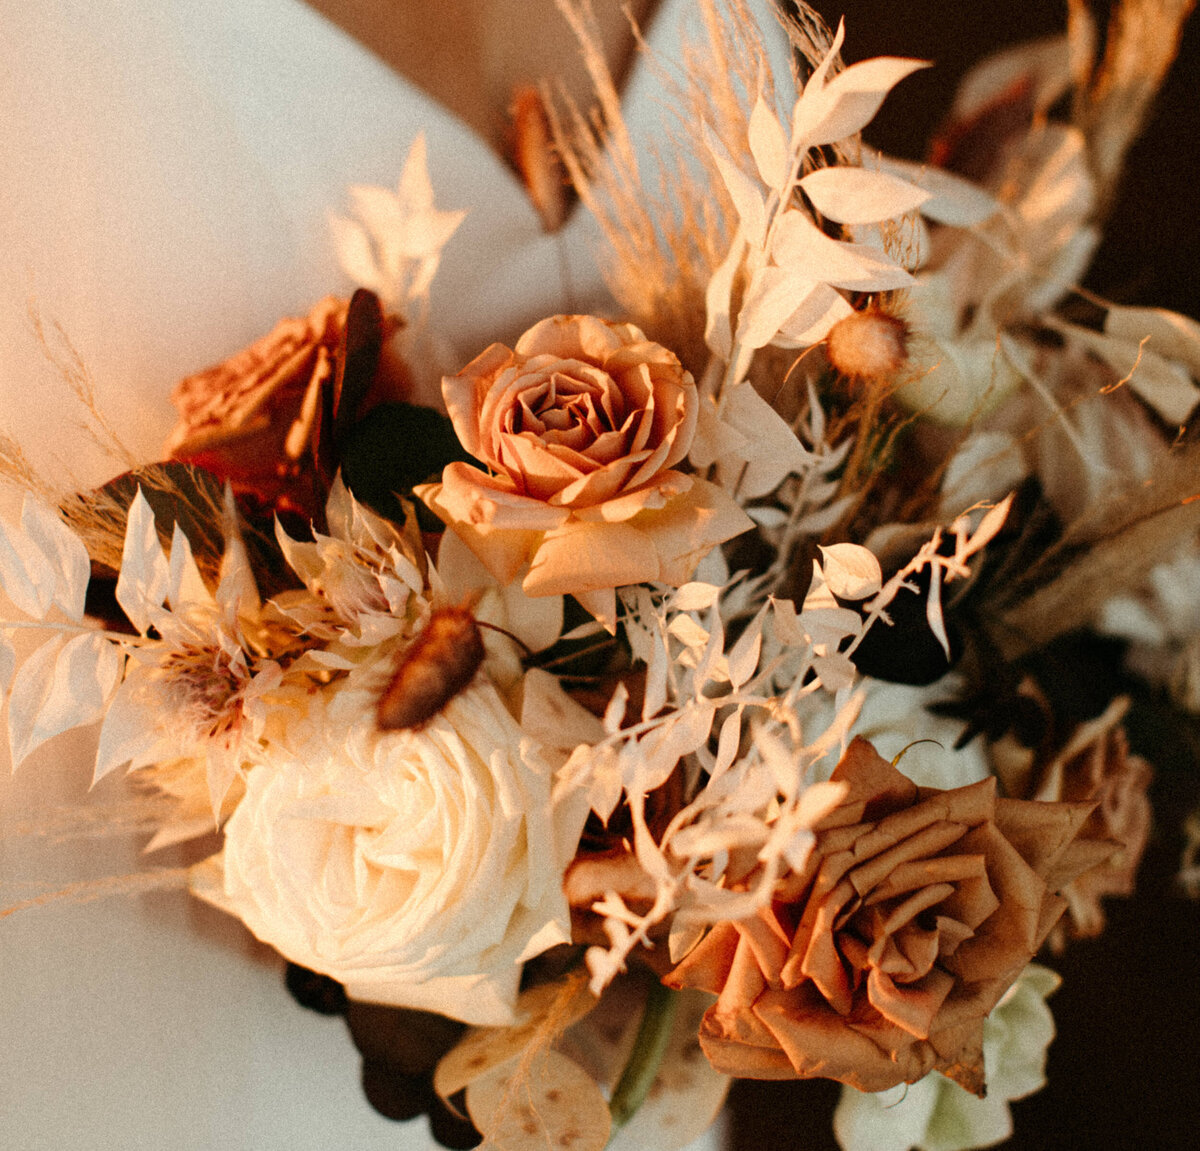 Bridal bouquet made with dried florals with golden hour sunset lighting